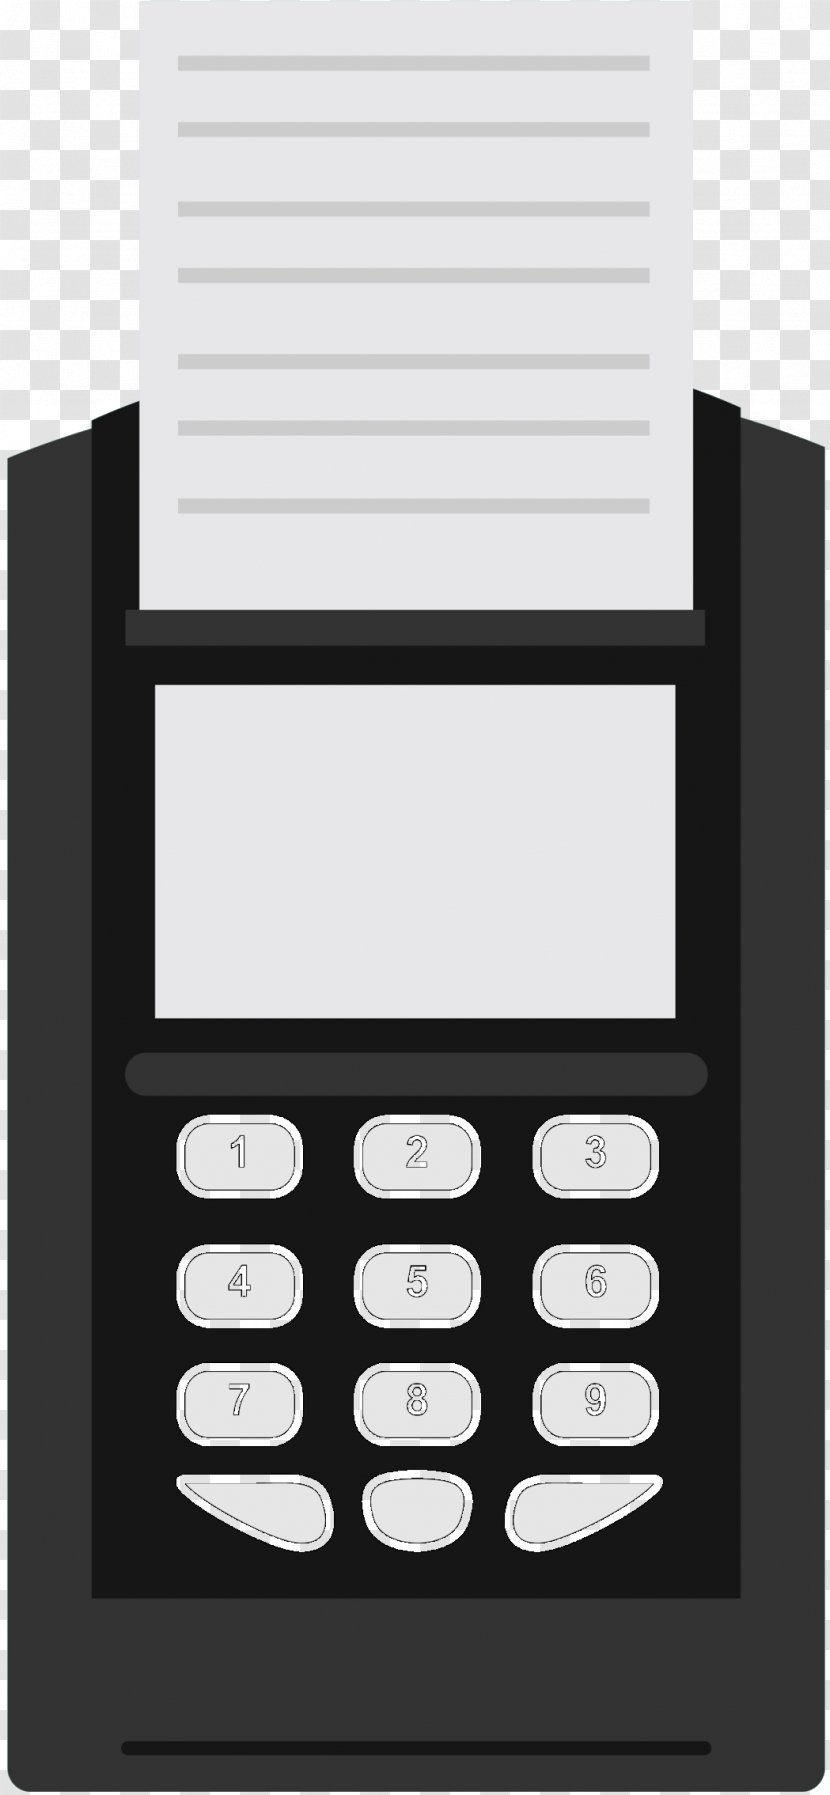 Telephony Product Design Pattern - Mobile Phone - Office Equipment Transparent PNG